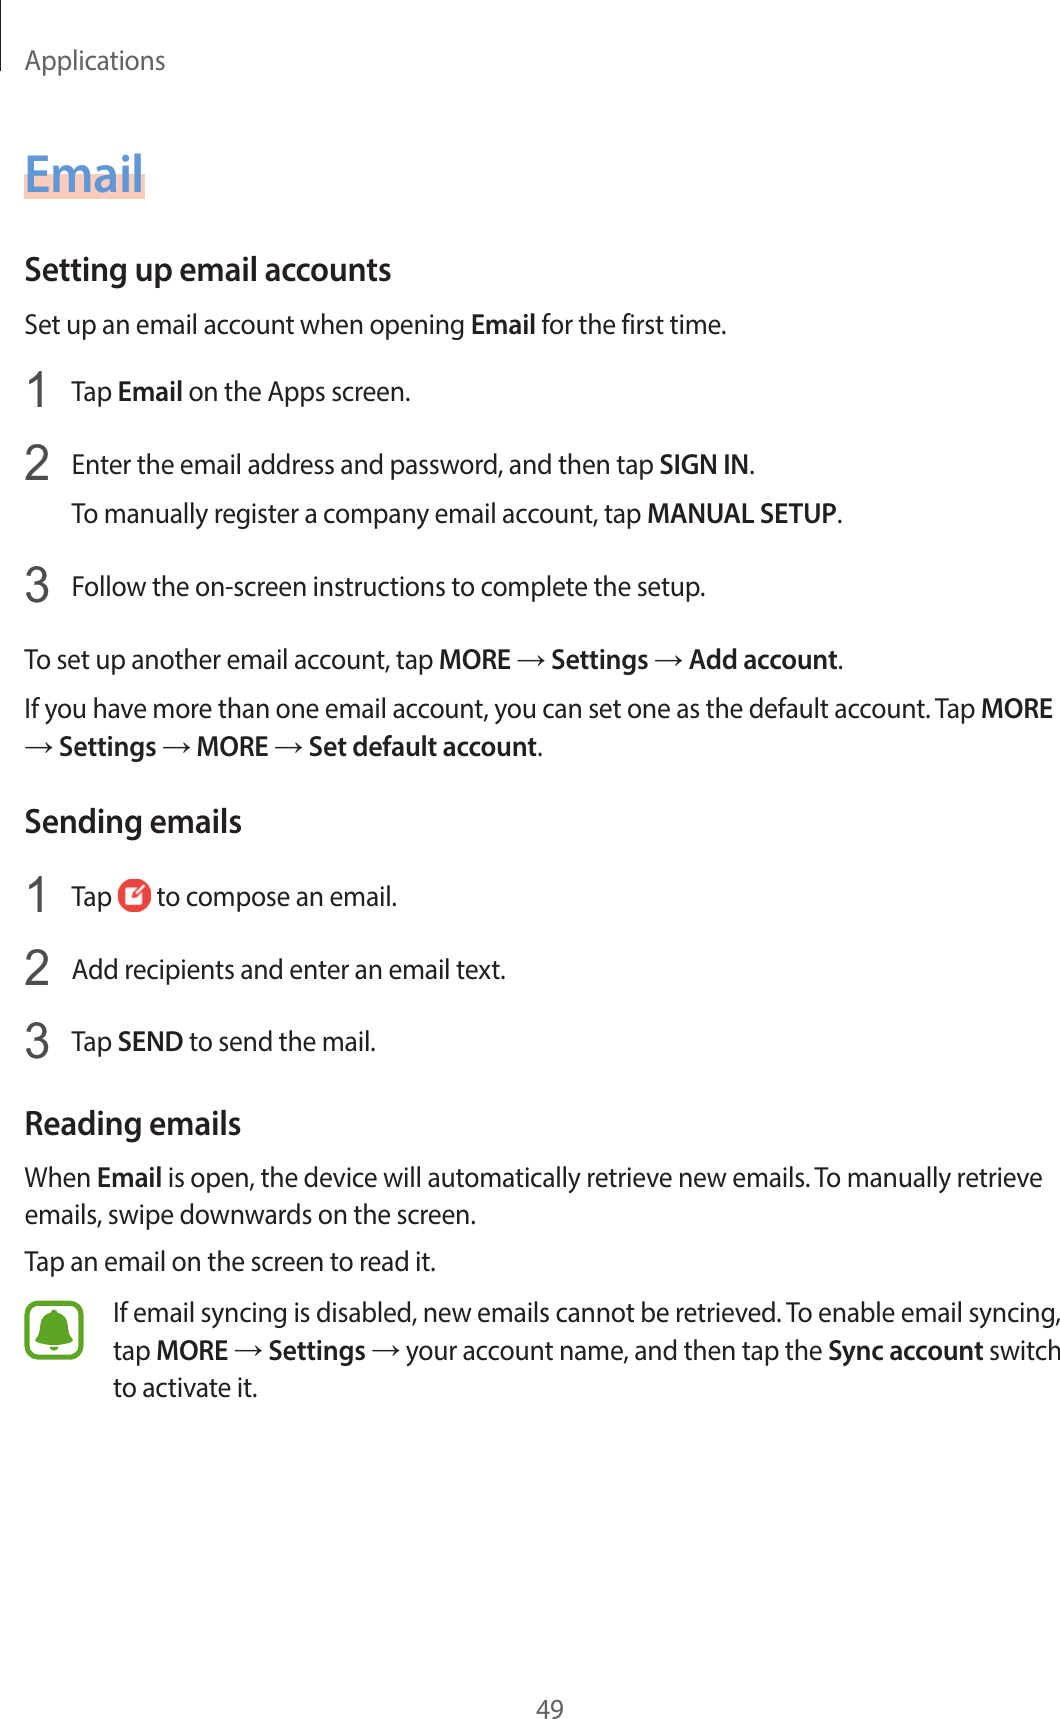 Applications49EmailSetting up email accountsSet up an email account when opening Email for the first time.1  Tap Email on the Apps screen.2  Enter the email address and password, and then tap SIGN IN.To manually register a company email account, tap MANUAL SETUP.3  Follow the on-screen instructions to complete the setup.To set up another email account, tap MORE → Settings → Add account.If you have more than one email account, you can set one as the default account. Tap MORE → Settings → MORE → Set default account.Sending emails1  Tap   to compose an email.2  Add recipients and enter an email text.3  Tap SEND to send the mail.Reading emailsWhen Email is open, the device will automatically retrieve new emails. To manually retrieve emails, swipe downwards on the screen.Tap an email on the screen to read it.If email syncing is disabled, new emails cannot be retrieved. To enable email syncing, tap MORE → Settings → your account name, and then tap the Sync account switch to activate it.